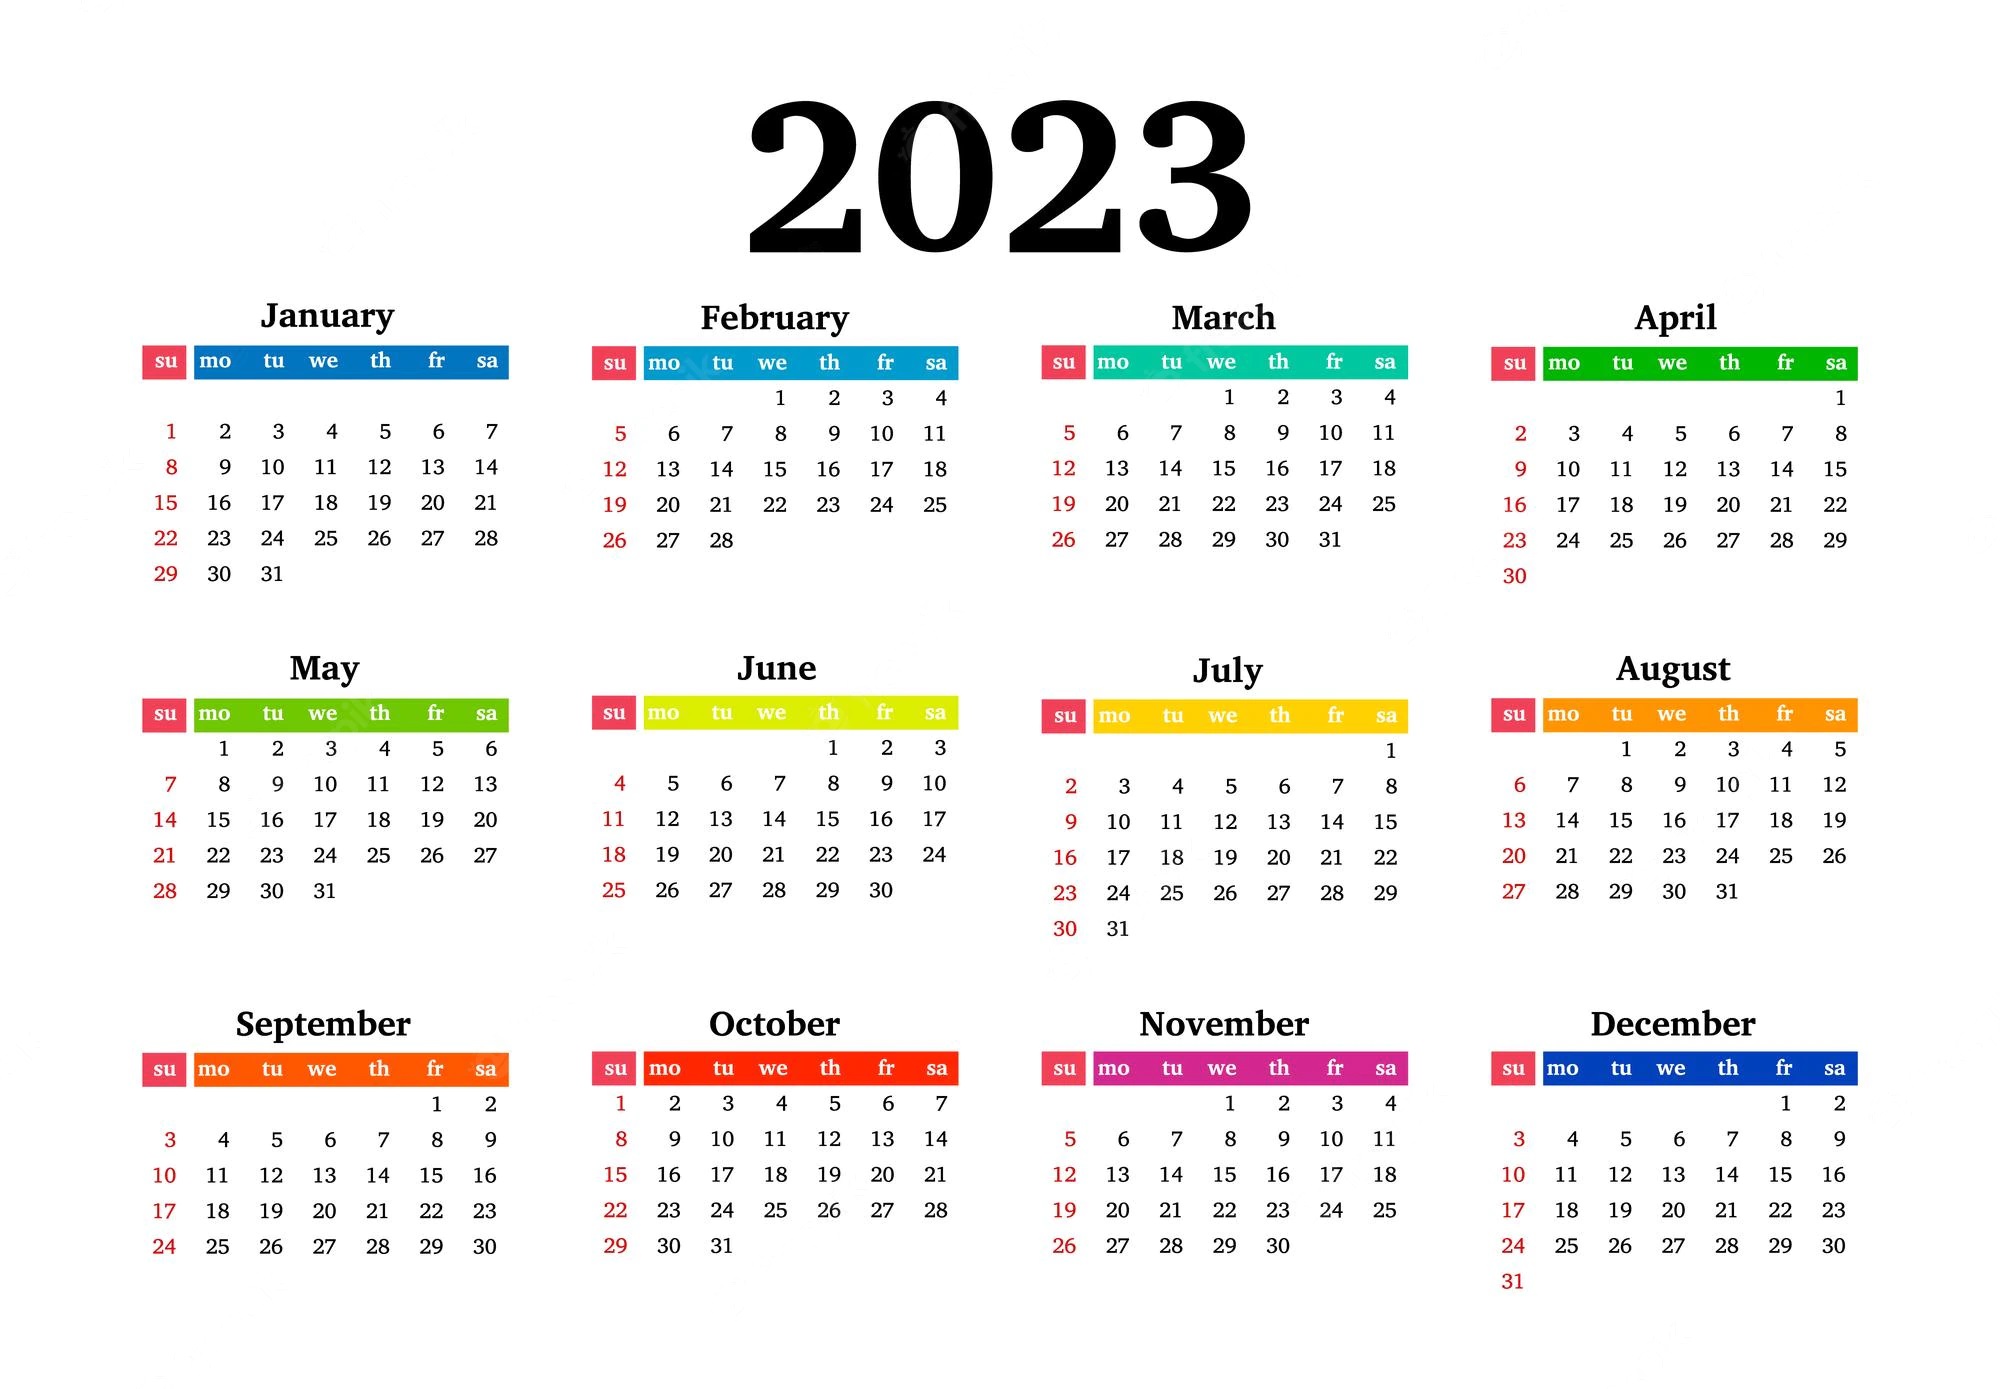 Dates for NT programs in 2023